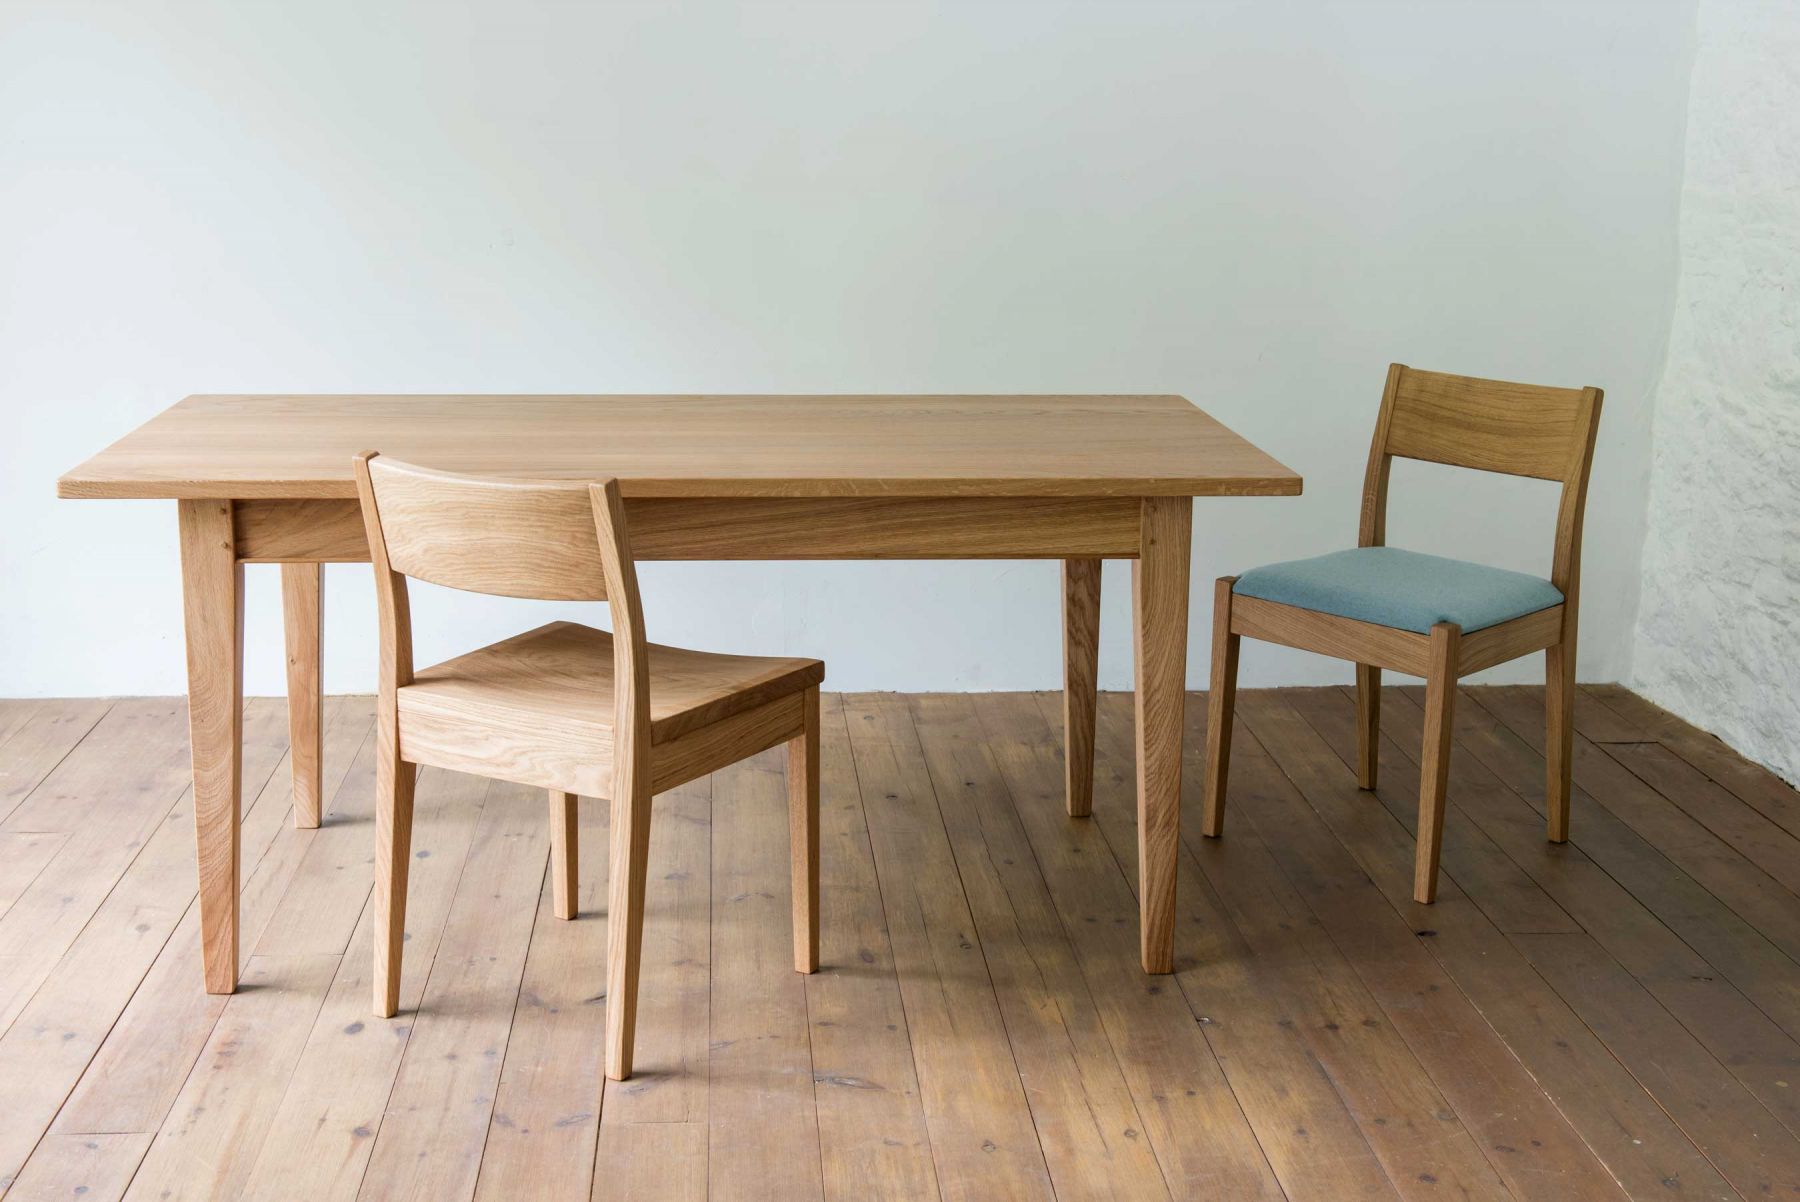 Table and chairs by Orpago Furniture Makers